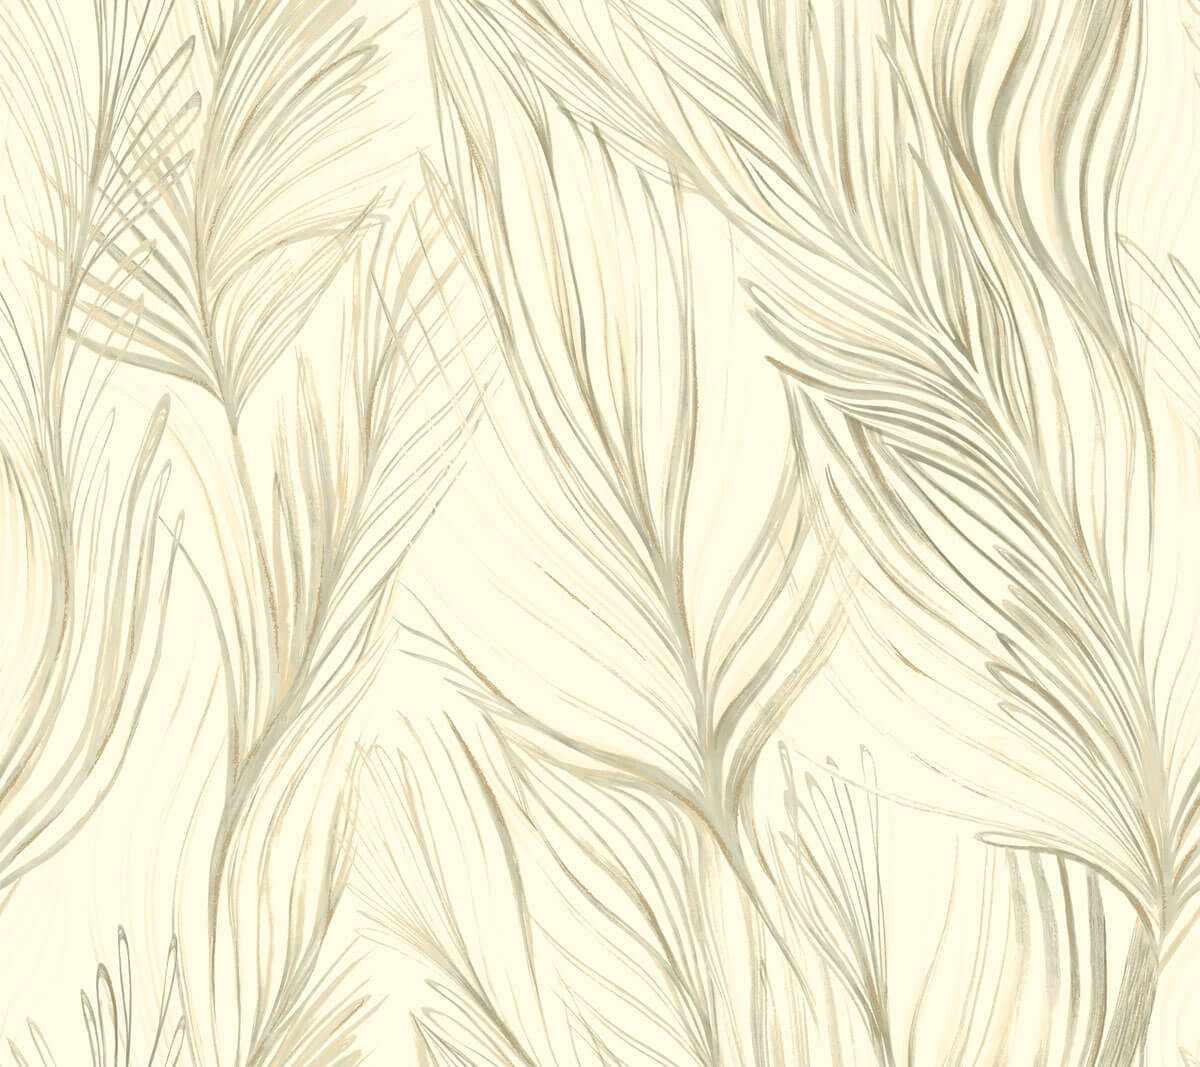 Peaceful Plume Wallpaper by Candice Olson - SAMPLE ONLY